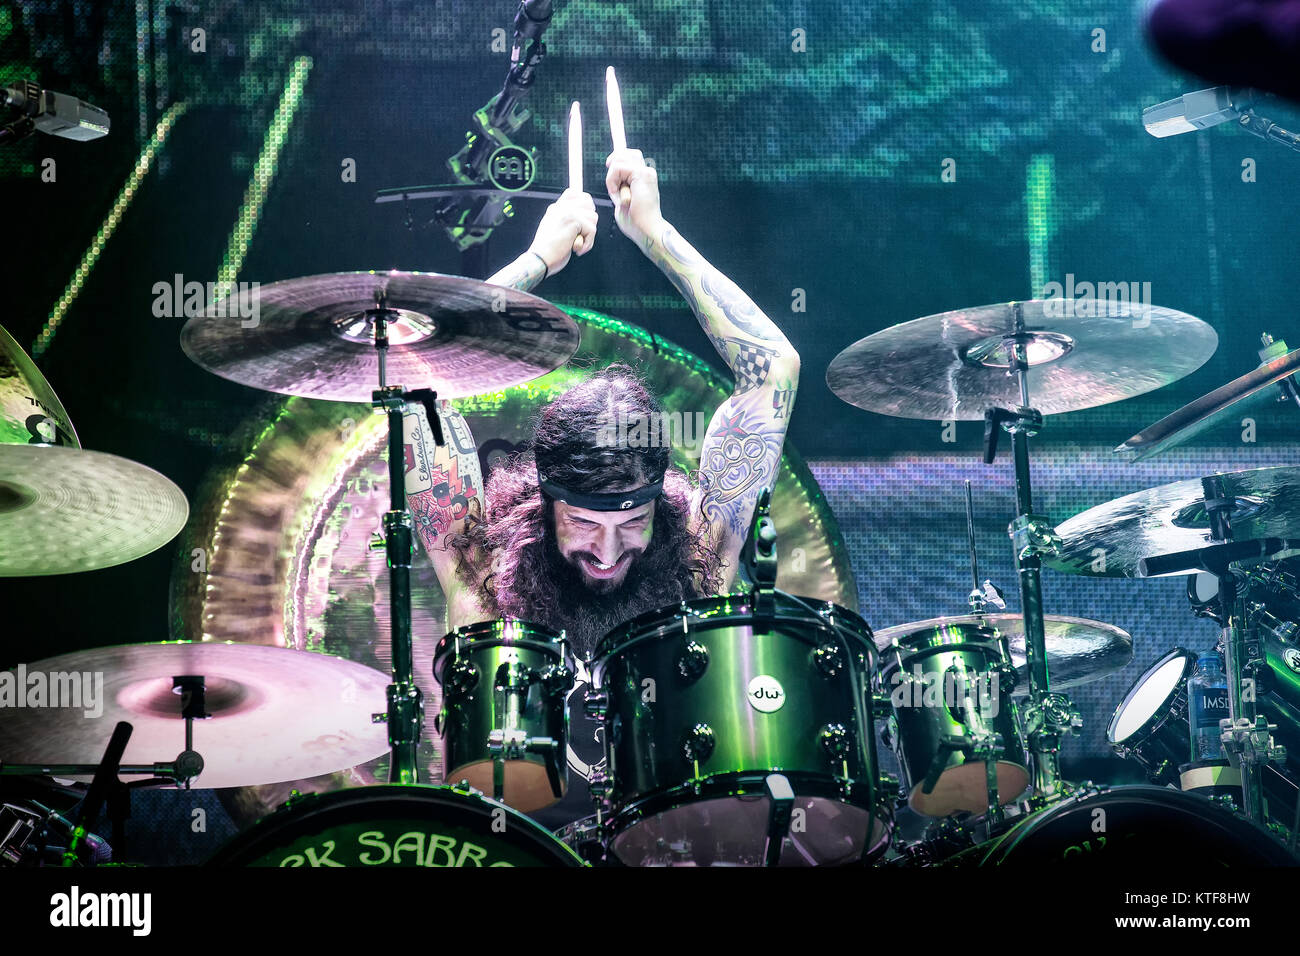 The English rock band Black Sabbath performs a live concert at Telenor Arena in Oslo. Here musician Tommy Clufetos on drums is seen live on stage. Norway, 24/11 2013. Stock Photo